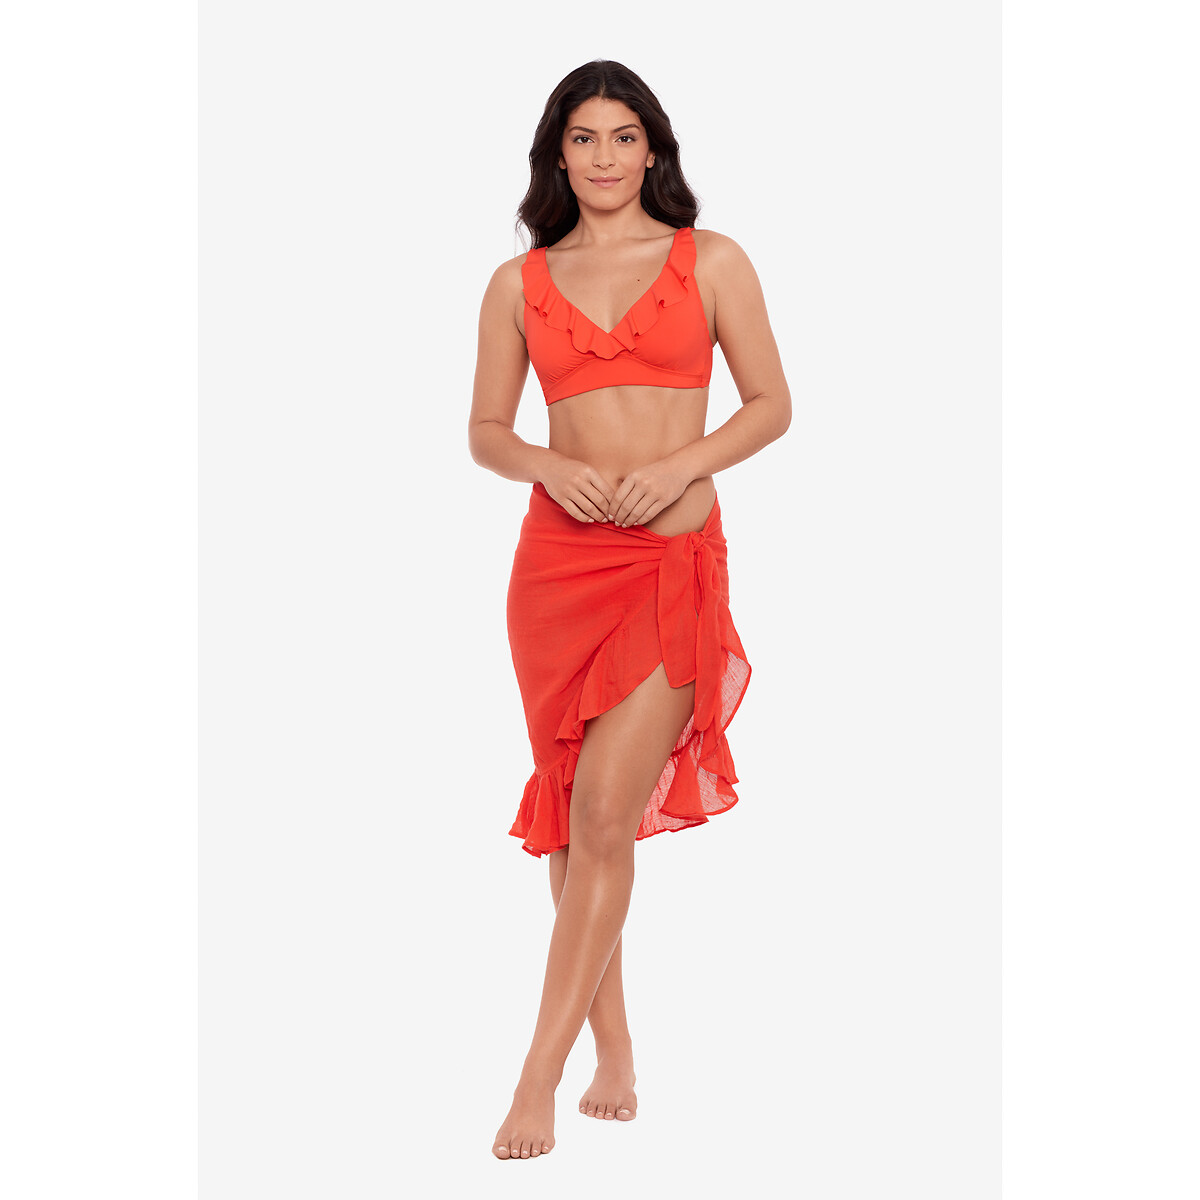 Image of Beach Club Solids Sarong in Cotton with Ruffled Edging